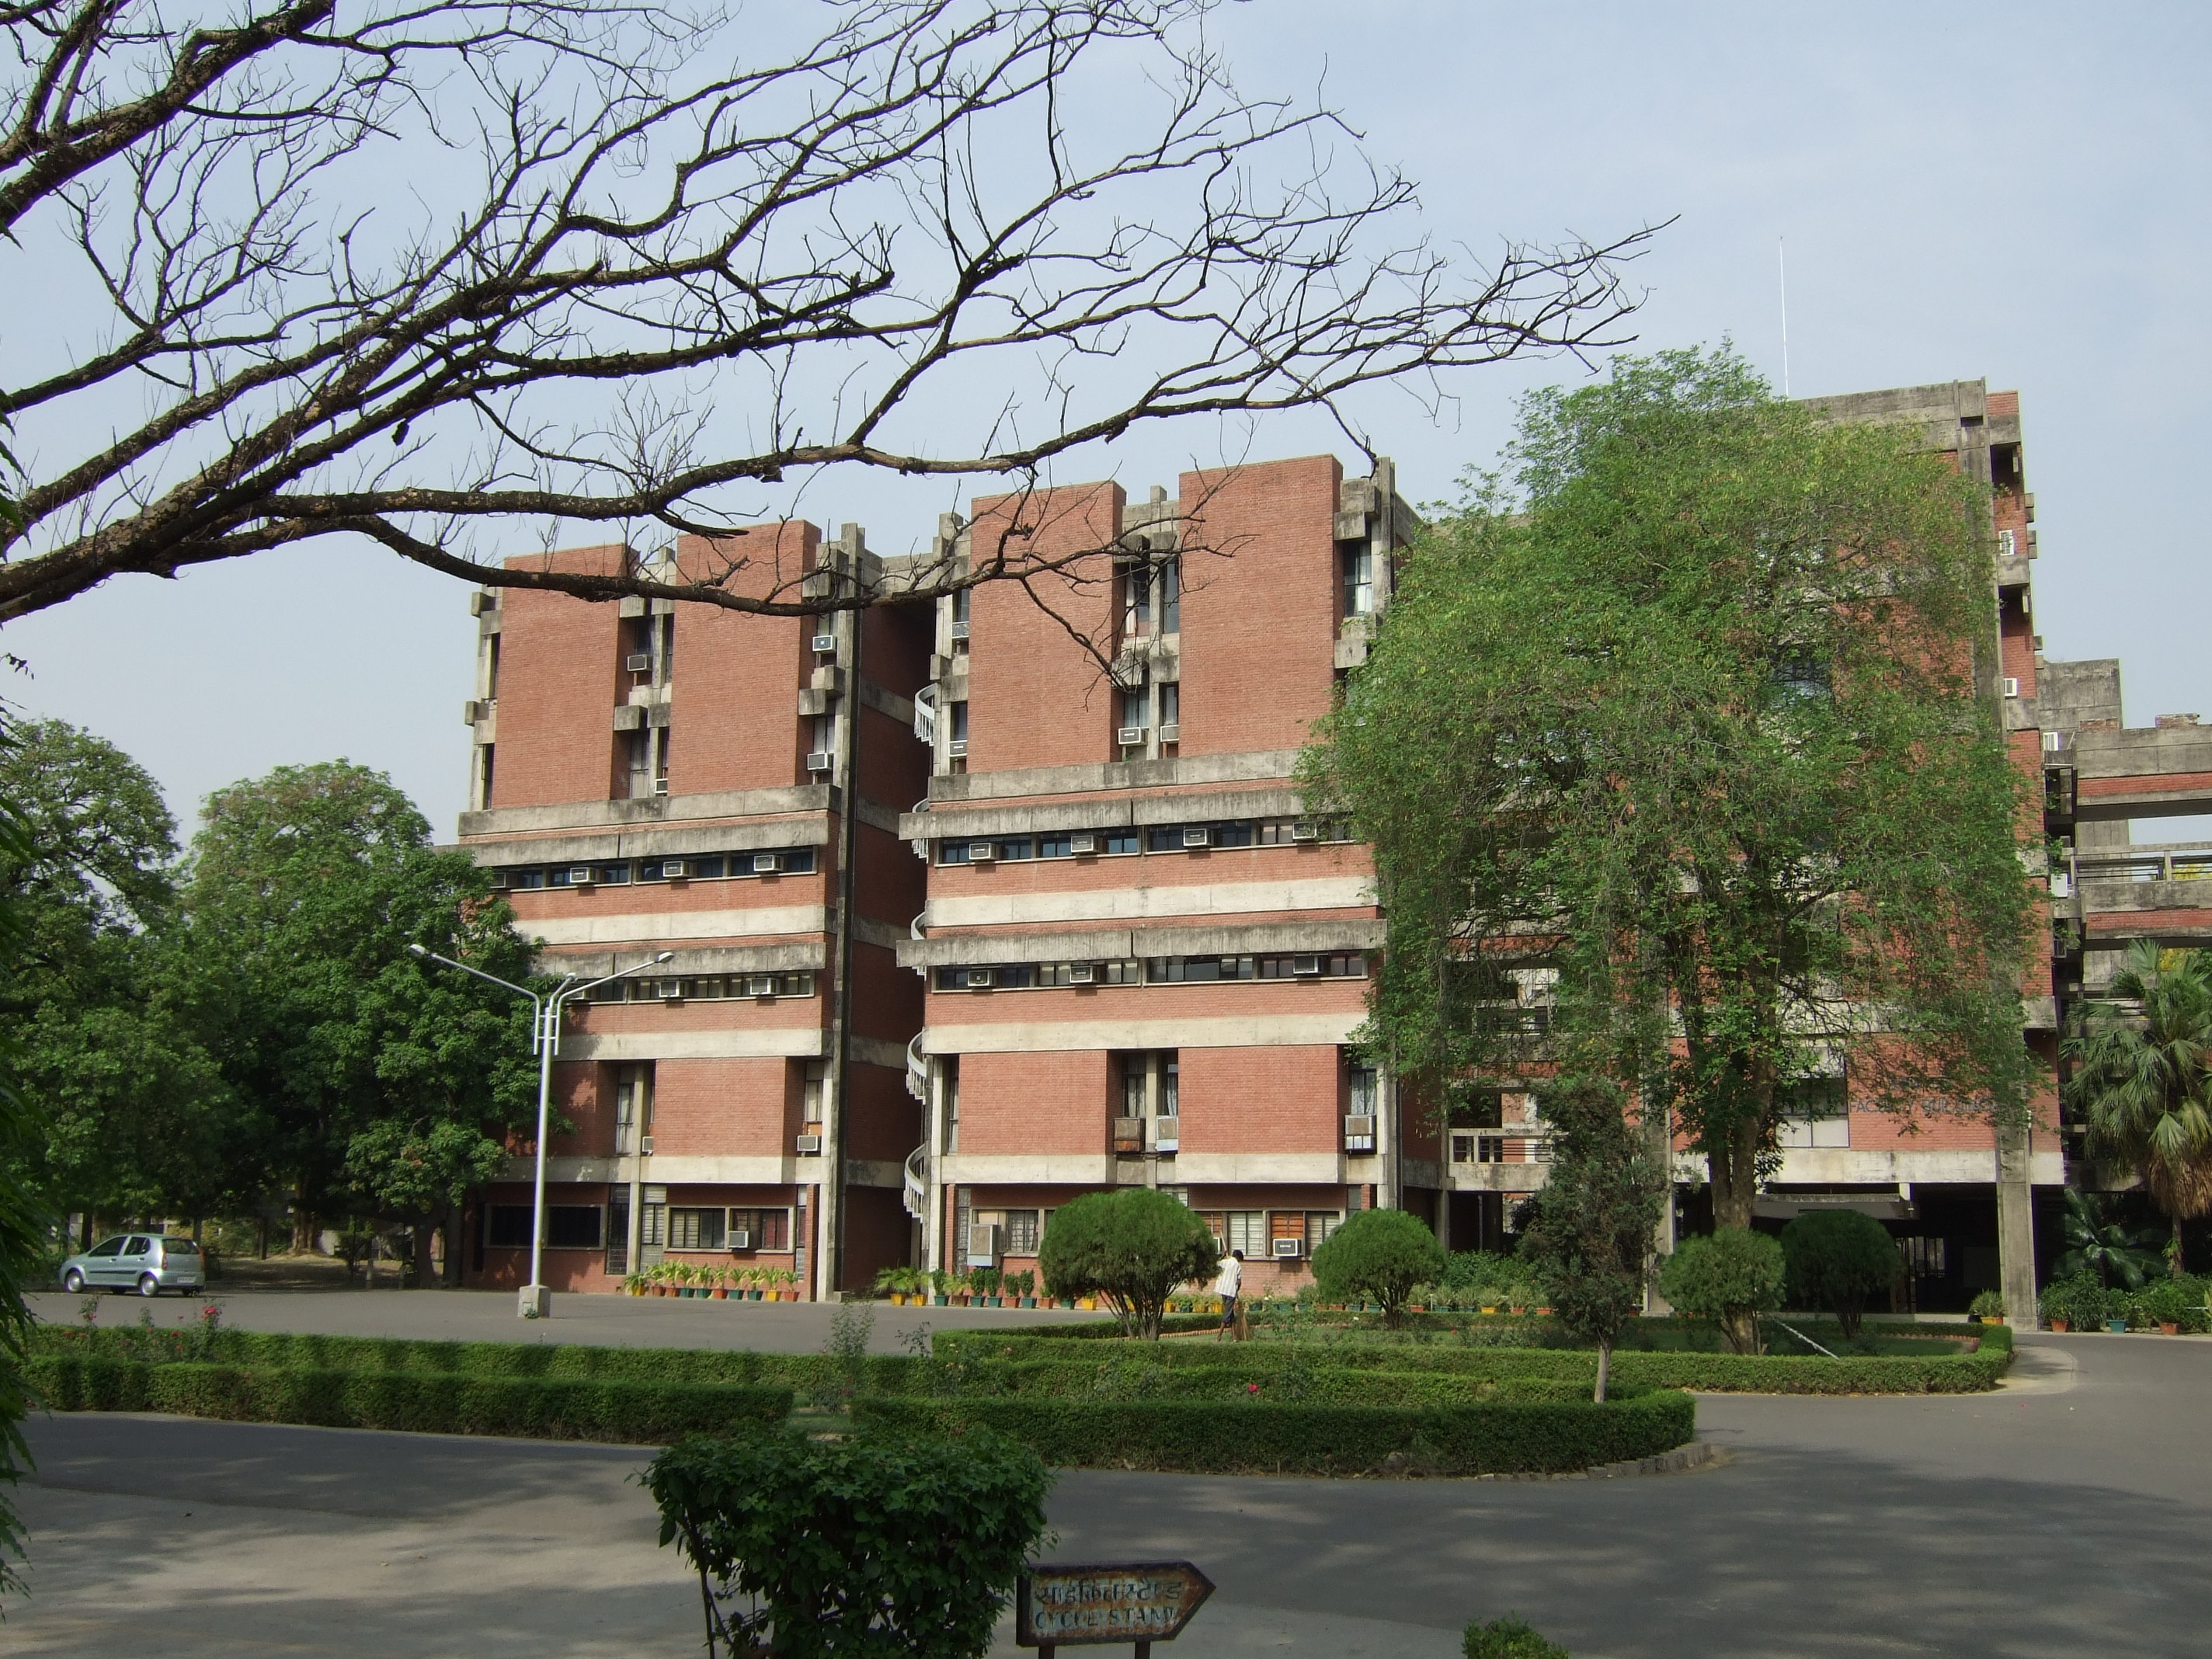 Indian Institute Of Technology Kanpur in Nankari,Kanpur - Best Institutes  For IIT in Kanpur - Justdial